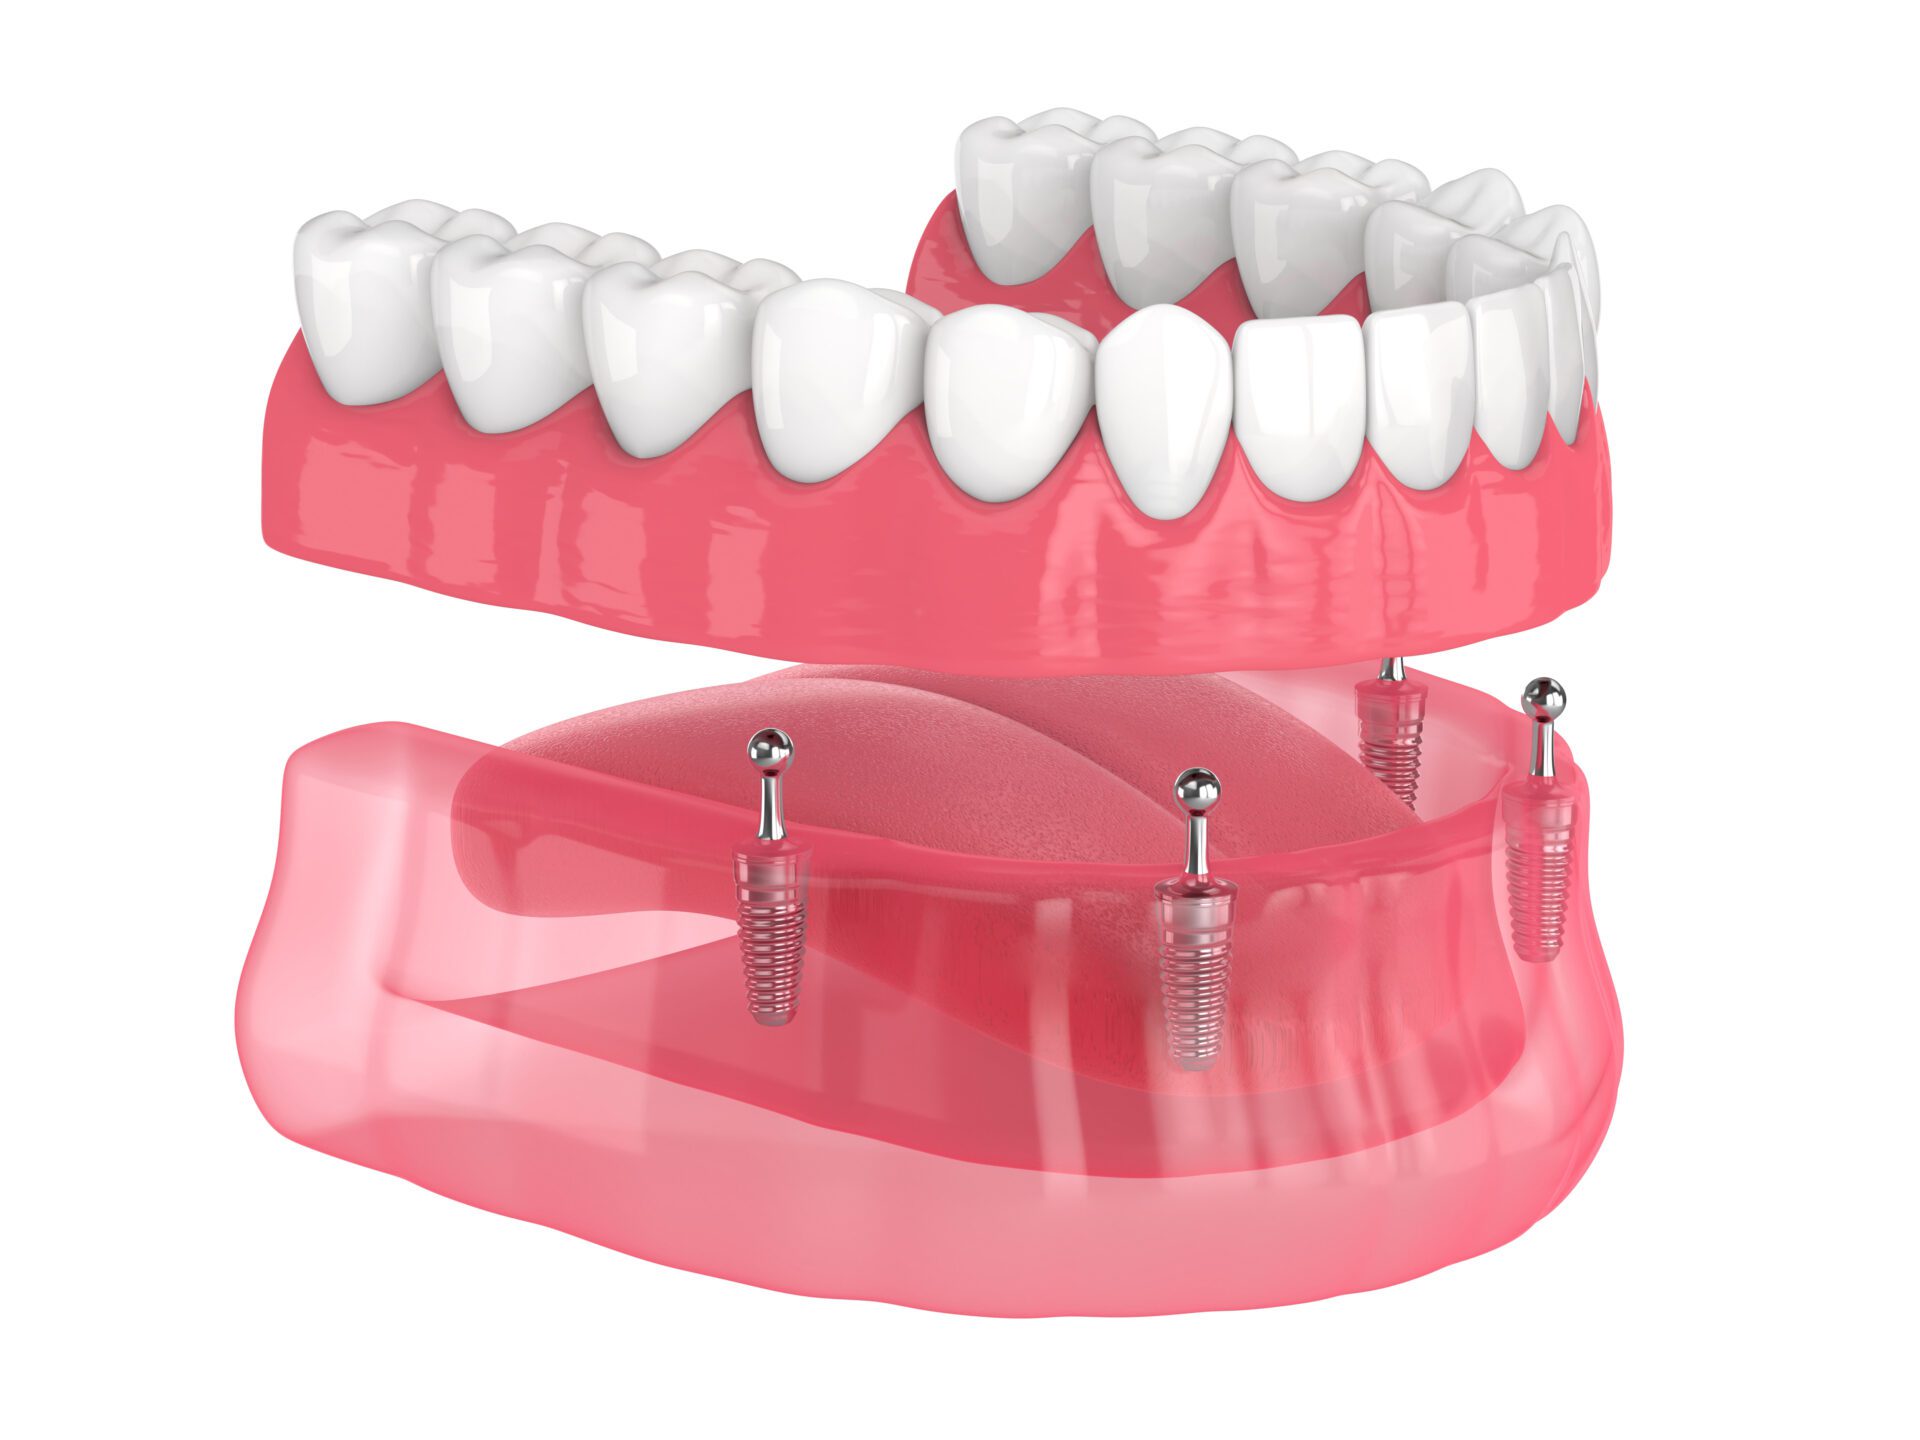 Lakeland | All-on-4 removable, implants supported, overdenture installation